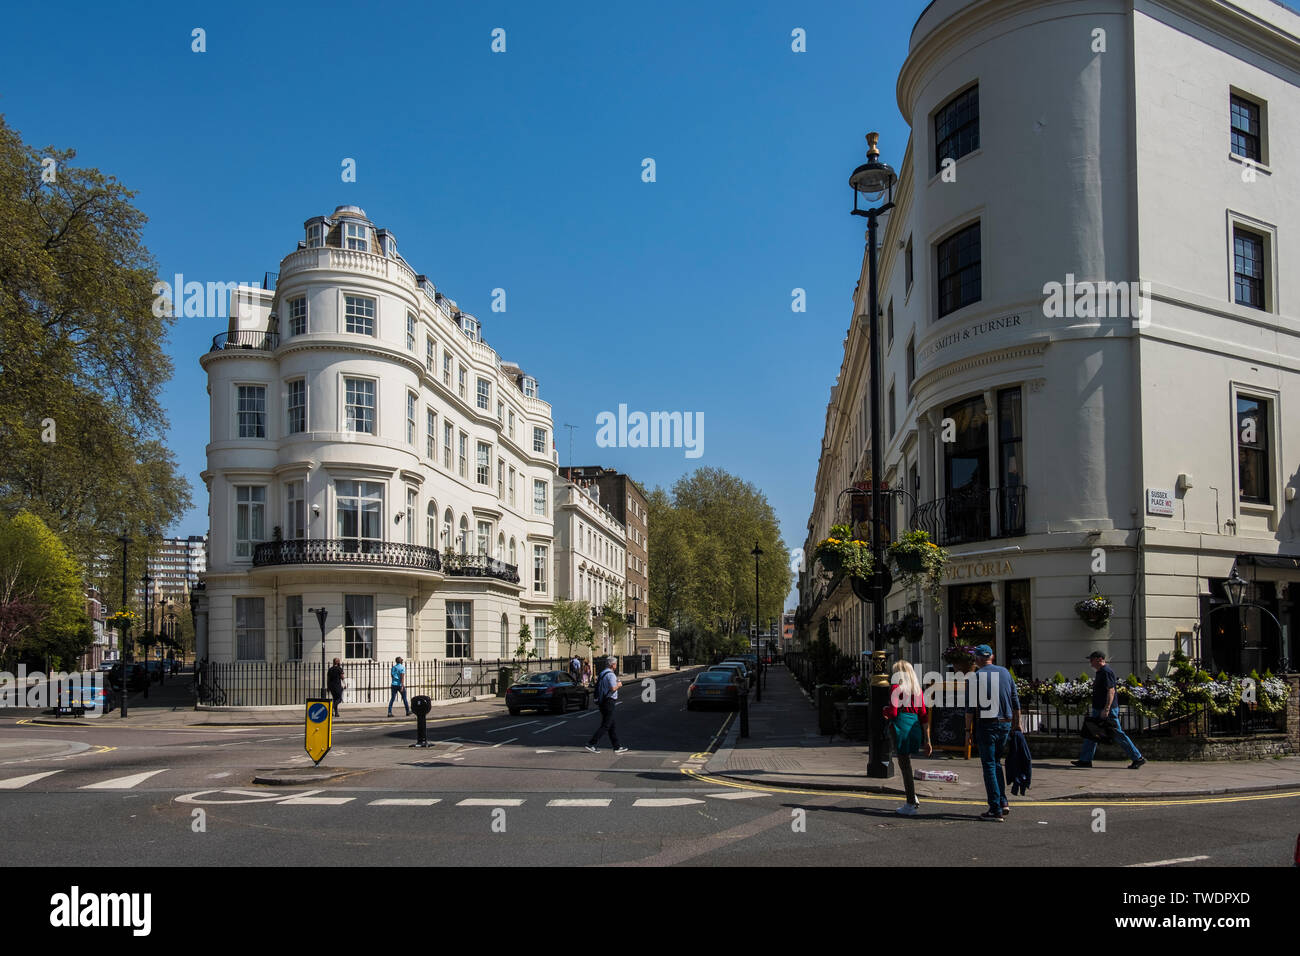 The Hyde Park Estate, residential district in the Paddington area, London, England, U.K. Stock Photo